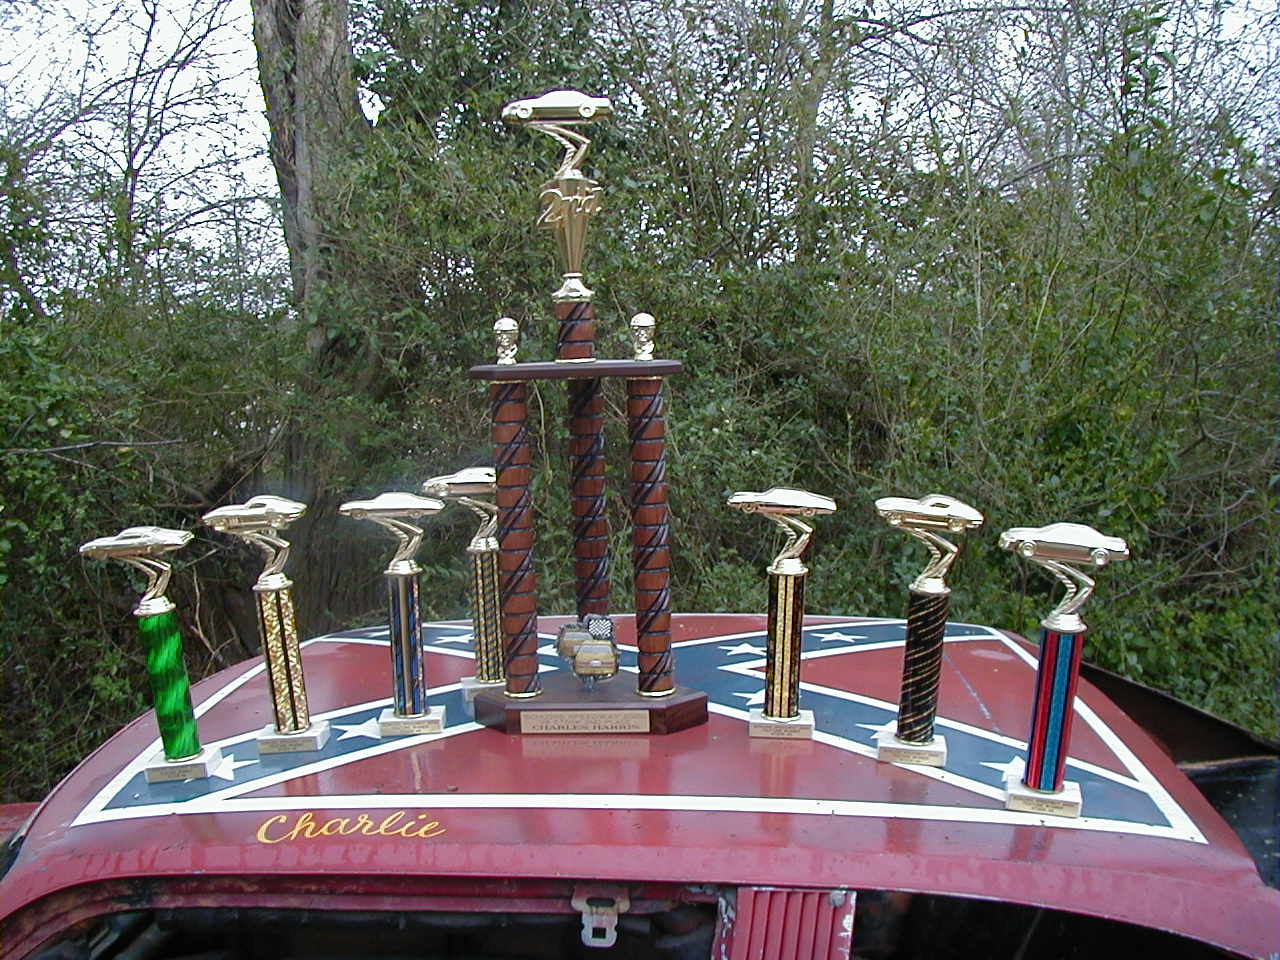 Some of the trophies